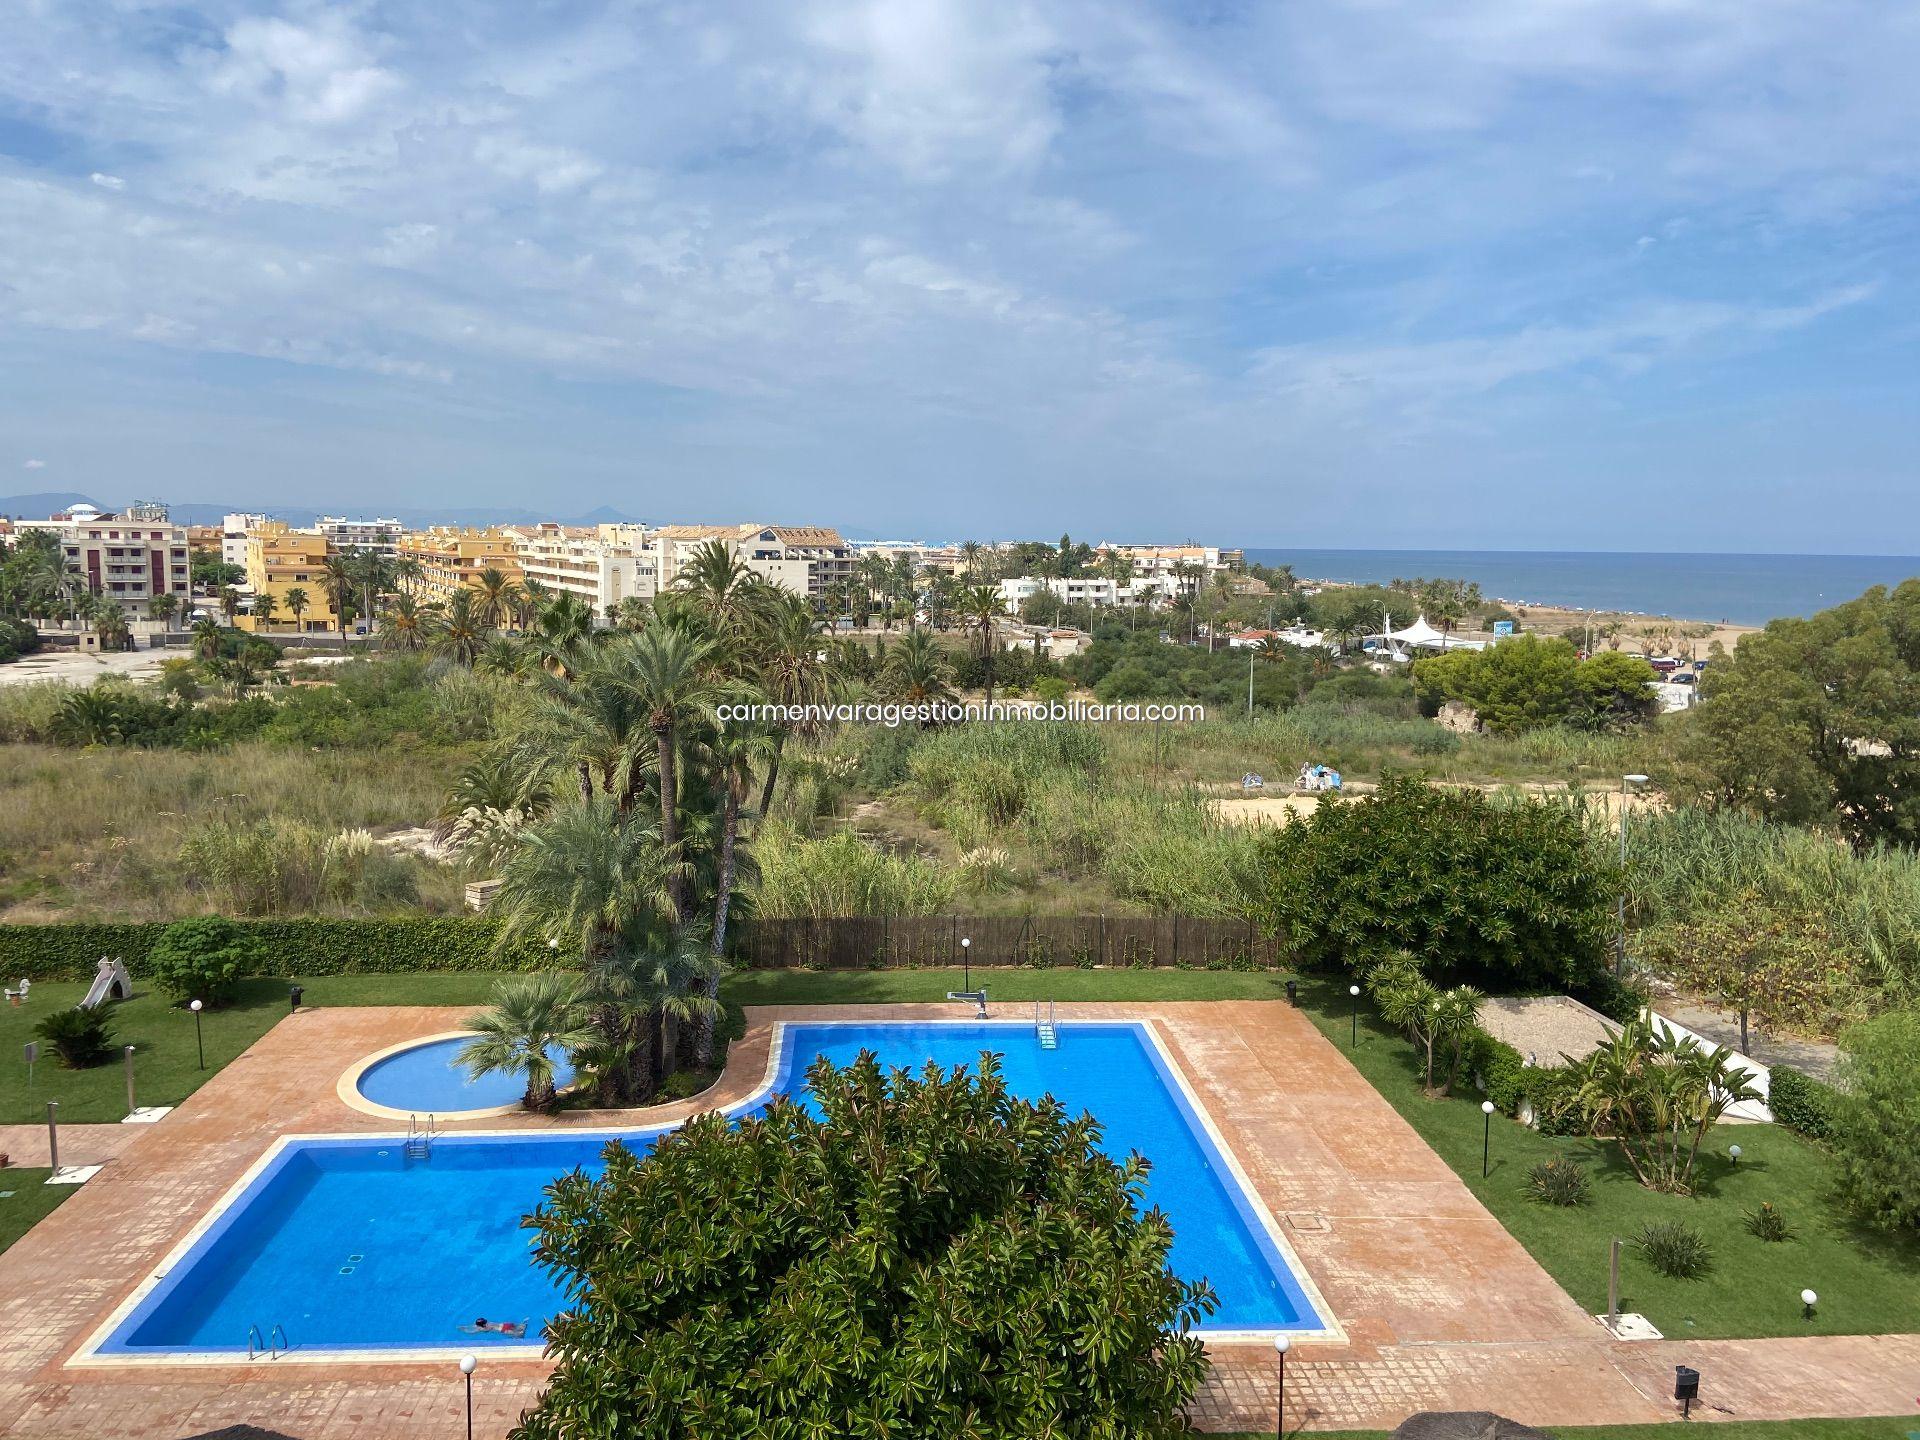 SALE OF DUPLEX PENTHOUSE IN DENIA. PANORAMIC VIEWS OF THE MEDITERRANEAN.